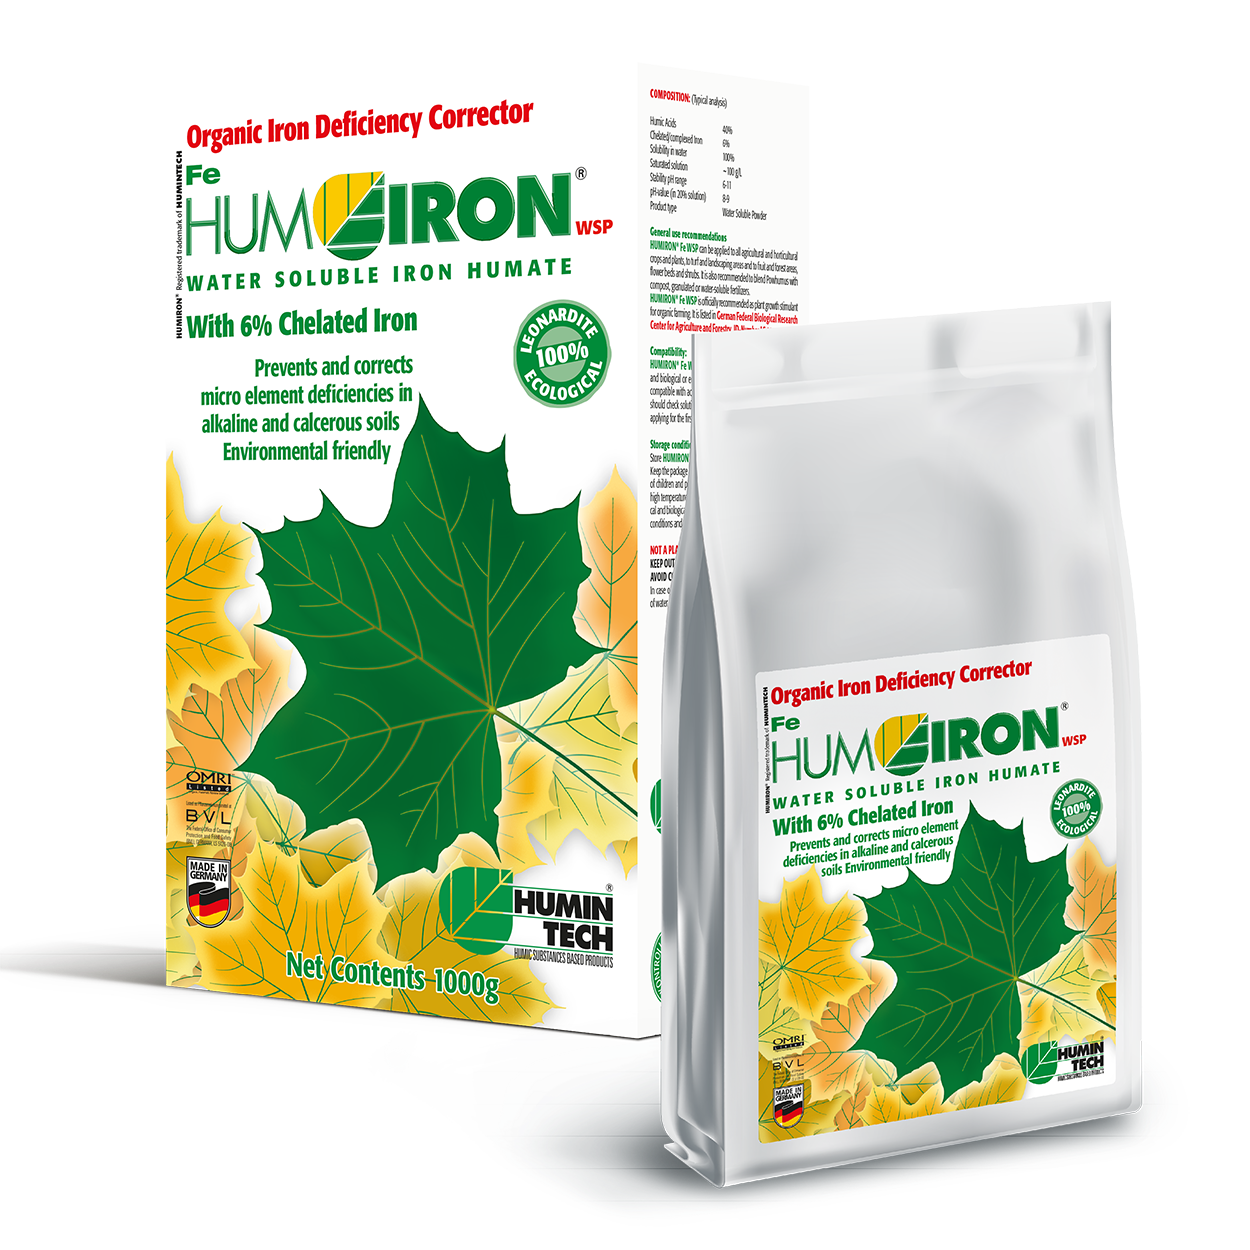 HUMIRON Fe WSP Organic Iron Deficiency Corrector Iron Humate with 6% Chelated and Complexed Iron